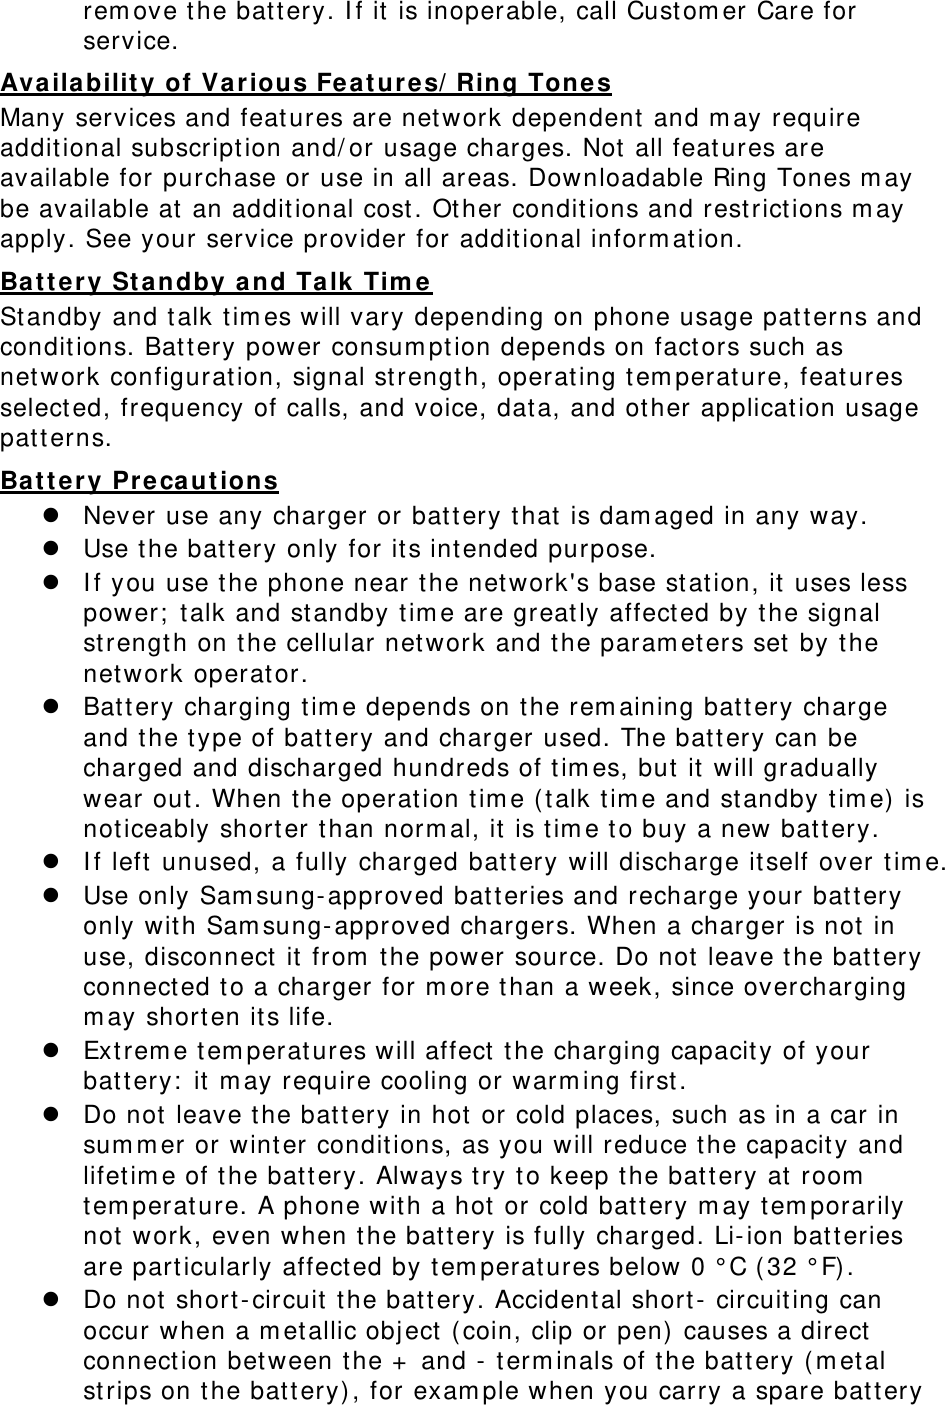 remove the battery. If it is inoperable, call Customer Care for service. Availability of Various Features/Ring Tones Many services and features are network dependent and may require additional subscription and/or usage charges. Not all features are available for purchase or use in all areas. Downloadable Ring Tones may be available at an additional cost. Other conditions and restrictions may apply. See your service provider for additional information. Battery Standby and Talk Time Standby and talk times will vary depending on phone usage patterns and conditions. Battery power consumption depends on factors such as network configuration, signal strength, operating temperature, features selected, frequency of calls, and voice, data, and other application usage patterns.  Battery Precautions z Never use any charger or battery that is damaged in any way. z Use the battery only for its intended purpose. z If you use the phone near the network&apos;s base station, it uses less power; talk and standby time are greatly affected by the signal strength on the cellular network and the parameters set by the network operator. z Battery charging time depends on the remaining battery charge and the type of battery and charger used. The battery can be charged and discharged hundreds of times, but it will gradually wear out. When the operation time (talk time and standby time) is noticeably shorter than normal, it is time to buy a new battery. z If left unused, a fully charged battery will discharge itself over time. z Use only Samsung-approved batteries and recharge your battery only with Samsung-approved chargers. When a charger is not in use, disconnect it from the power source. Do not leave the battery connected to a charger for more than a week, since overcharging may shorten its life. z Extreme temperatures will affect the charging capacity of your battery: it may require cooling or warming first. z Do not leave the battery in hot or cold places, such as in a car in summer or winter conditions, as you will reduce the capacity and lifetime of the battery. Always try to keep the battery at room temperature. A phone with a hot or cold battery may temporarily not work, even when the battery is fully charged. Li-ion batteries are particularly affected by temperatures below 0 °C (32 °F). z Do not short-circuit the battery. Accidental short- circuiting can occur when a metallic object (coin, clip or pen) causes a direct connection between the + and - terminals of the battery (metal strips on the battery), for example when you carry a spare battery 